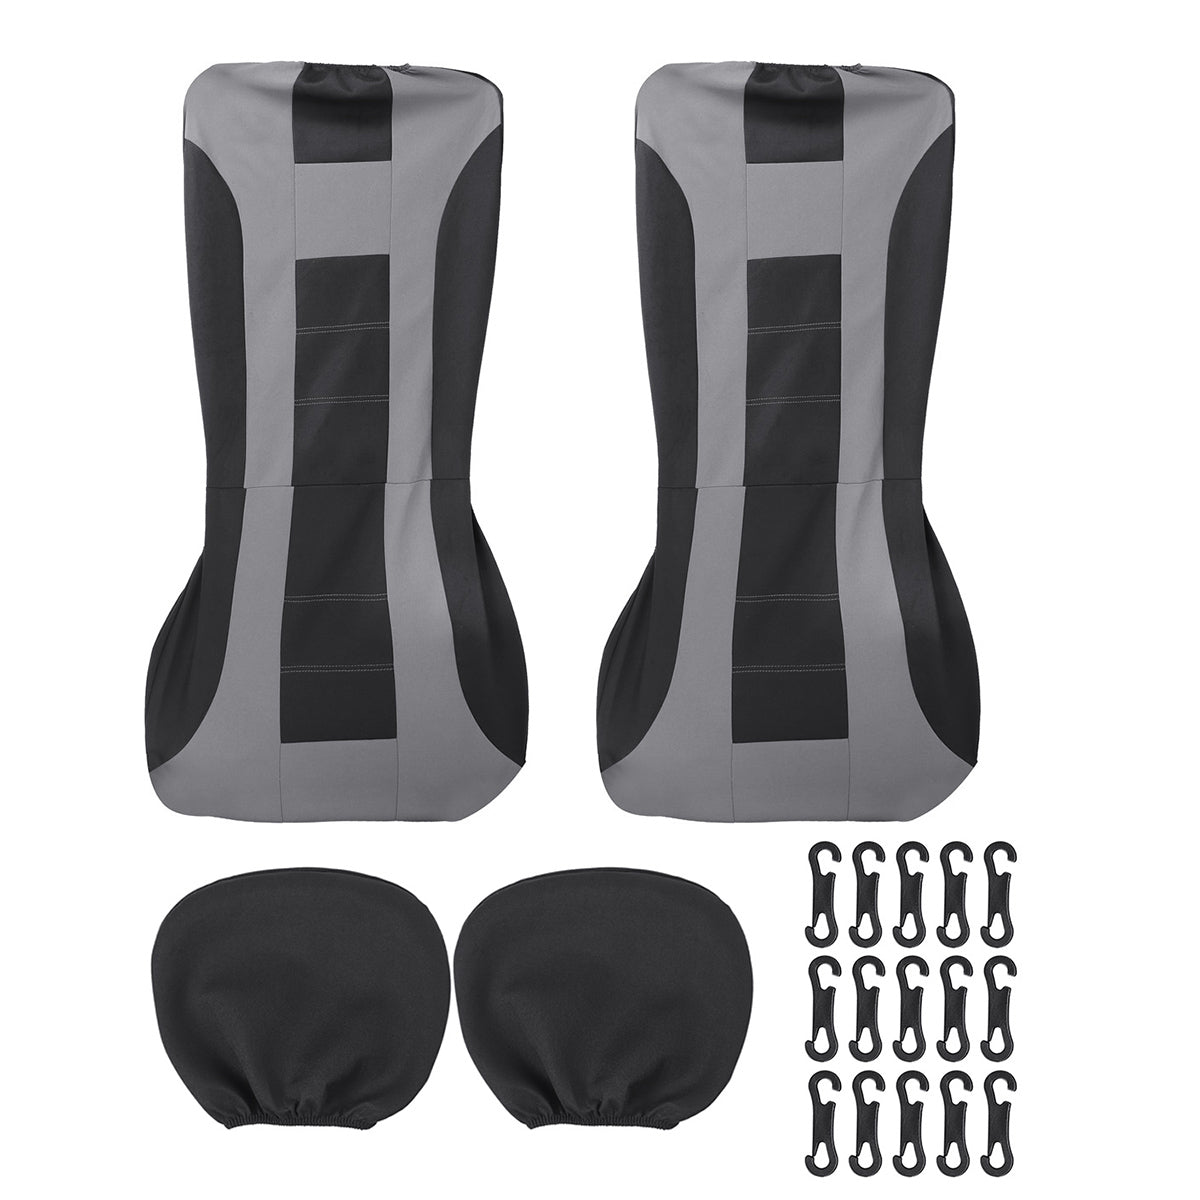 Auto Seat Covers for Car Truck SUV Van Universal Protectors Front Rear Covers - Auto GoShop